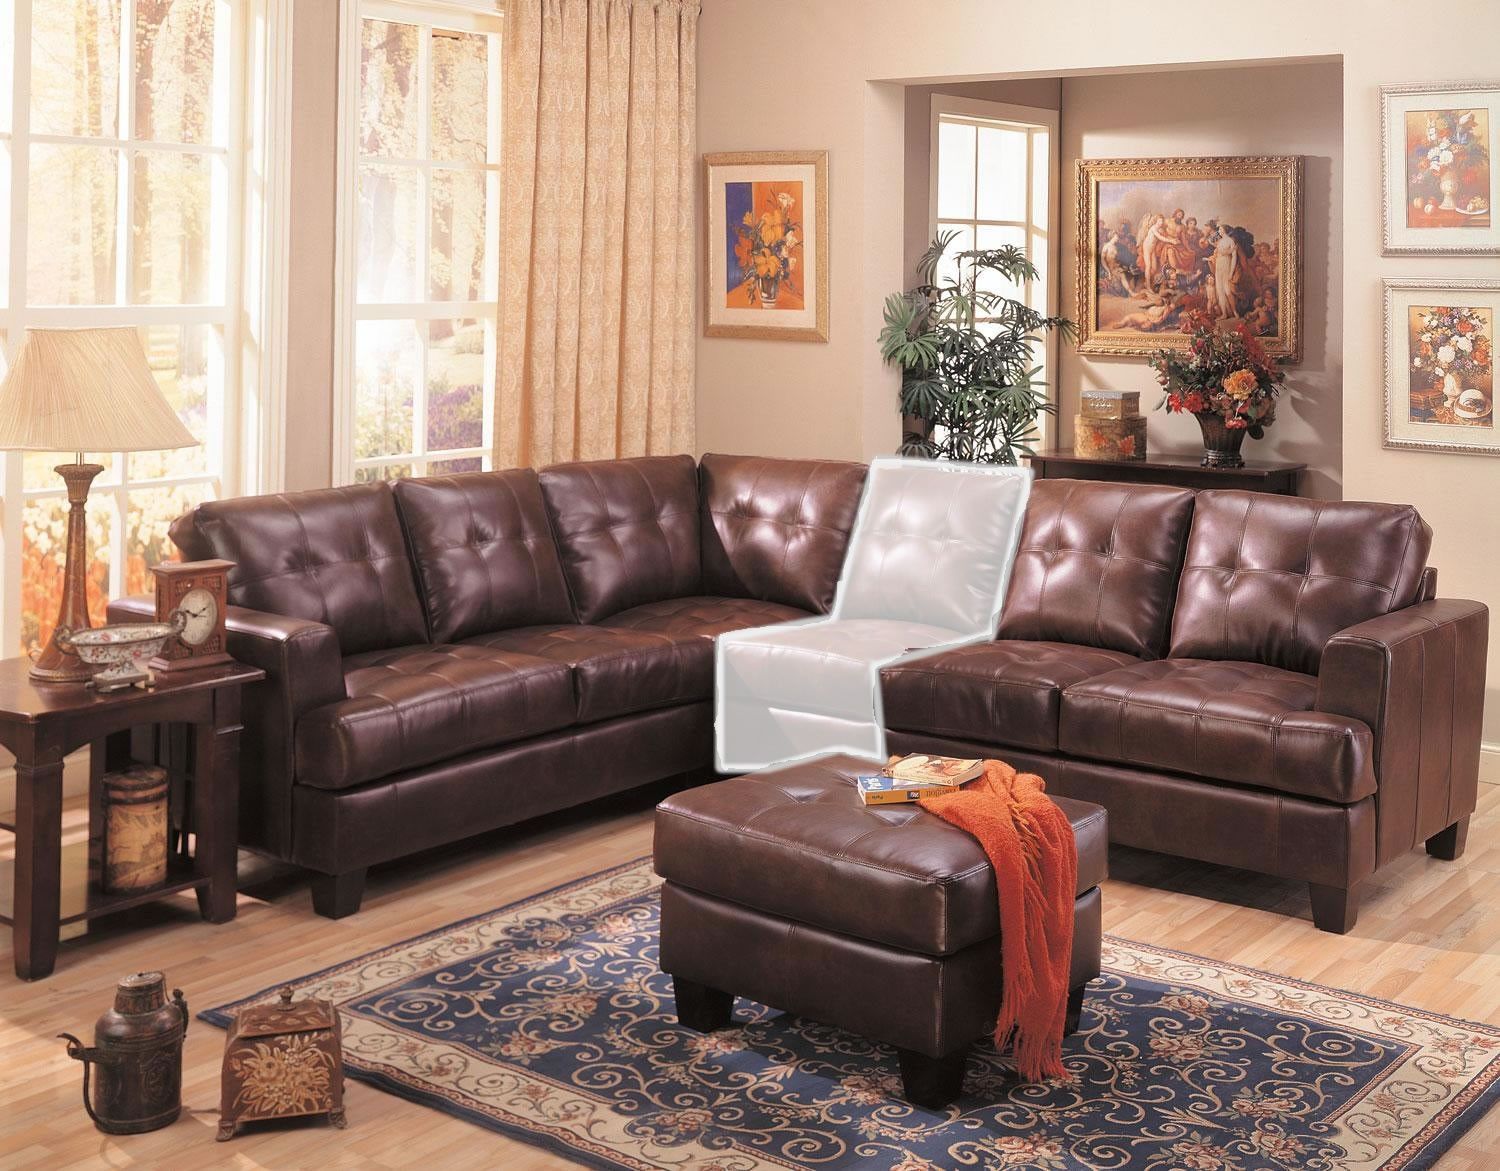 Samuel 3 Piece Brown Leather Sectional Sofa From Coaster (500911 Inside 3 Piece Leather Sectional Sofa Sets (Gallery 1 of 20)